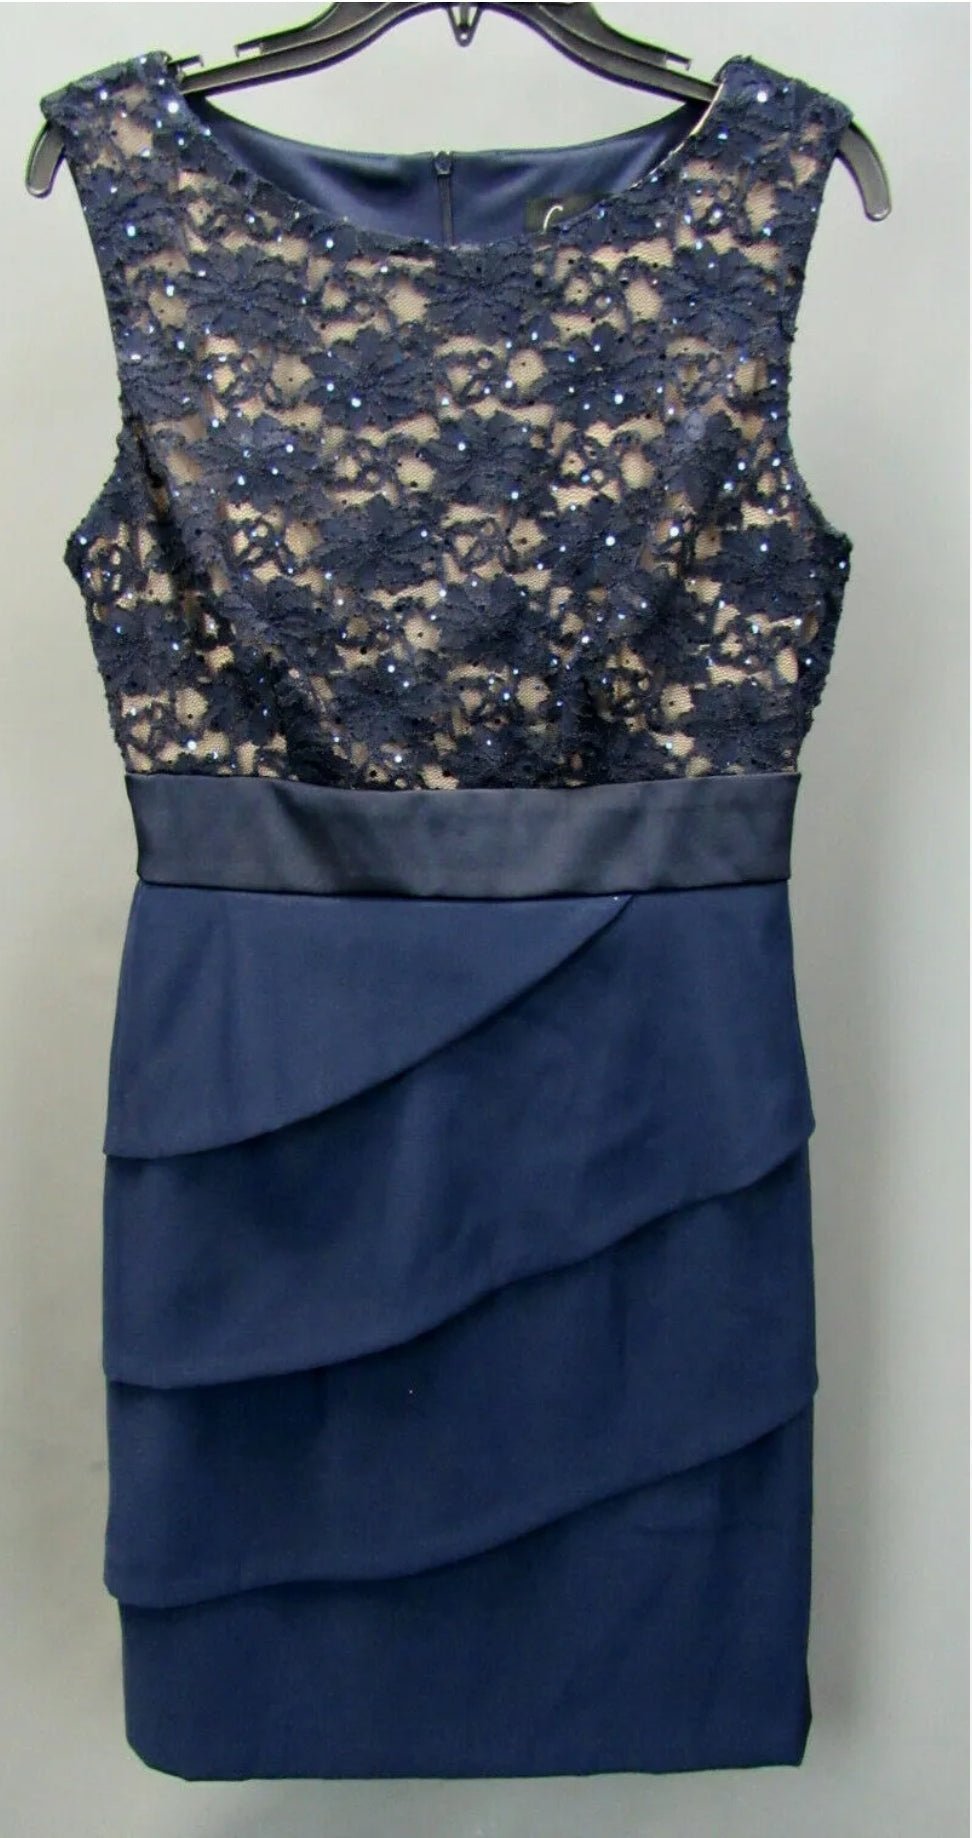 Connected Lace-Top Sheath Dress MSRP $79.50 Size 8-M NEW Navy - BELLEZA'S - Connected Lace-Top Sheath Dress MSRP $79.50 Size 8-M NEW Navy - BELLEZA'S - Vestidos - TC391927M1